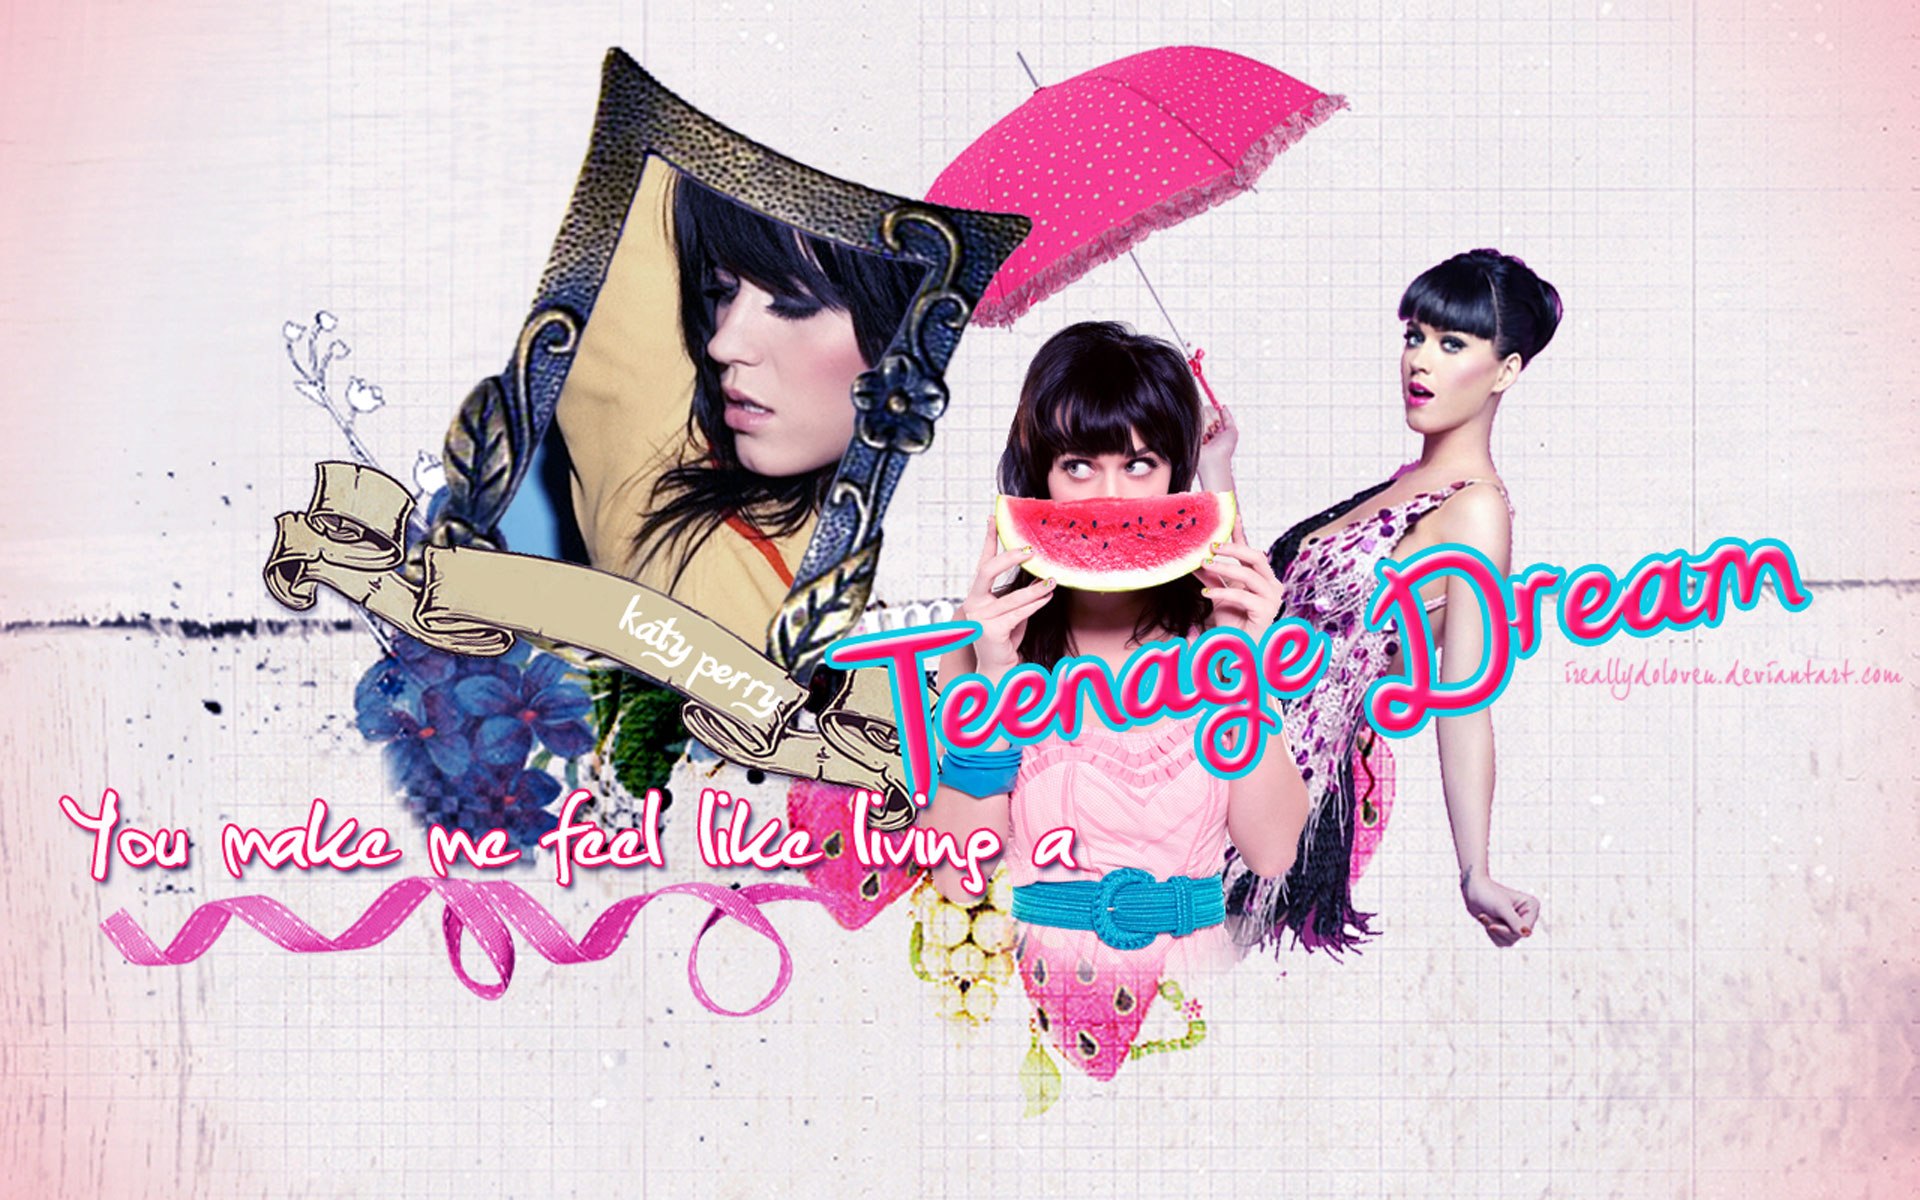 Katy perry teenage dream wallpaper - High Quality and other